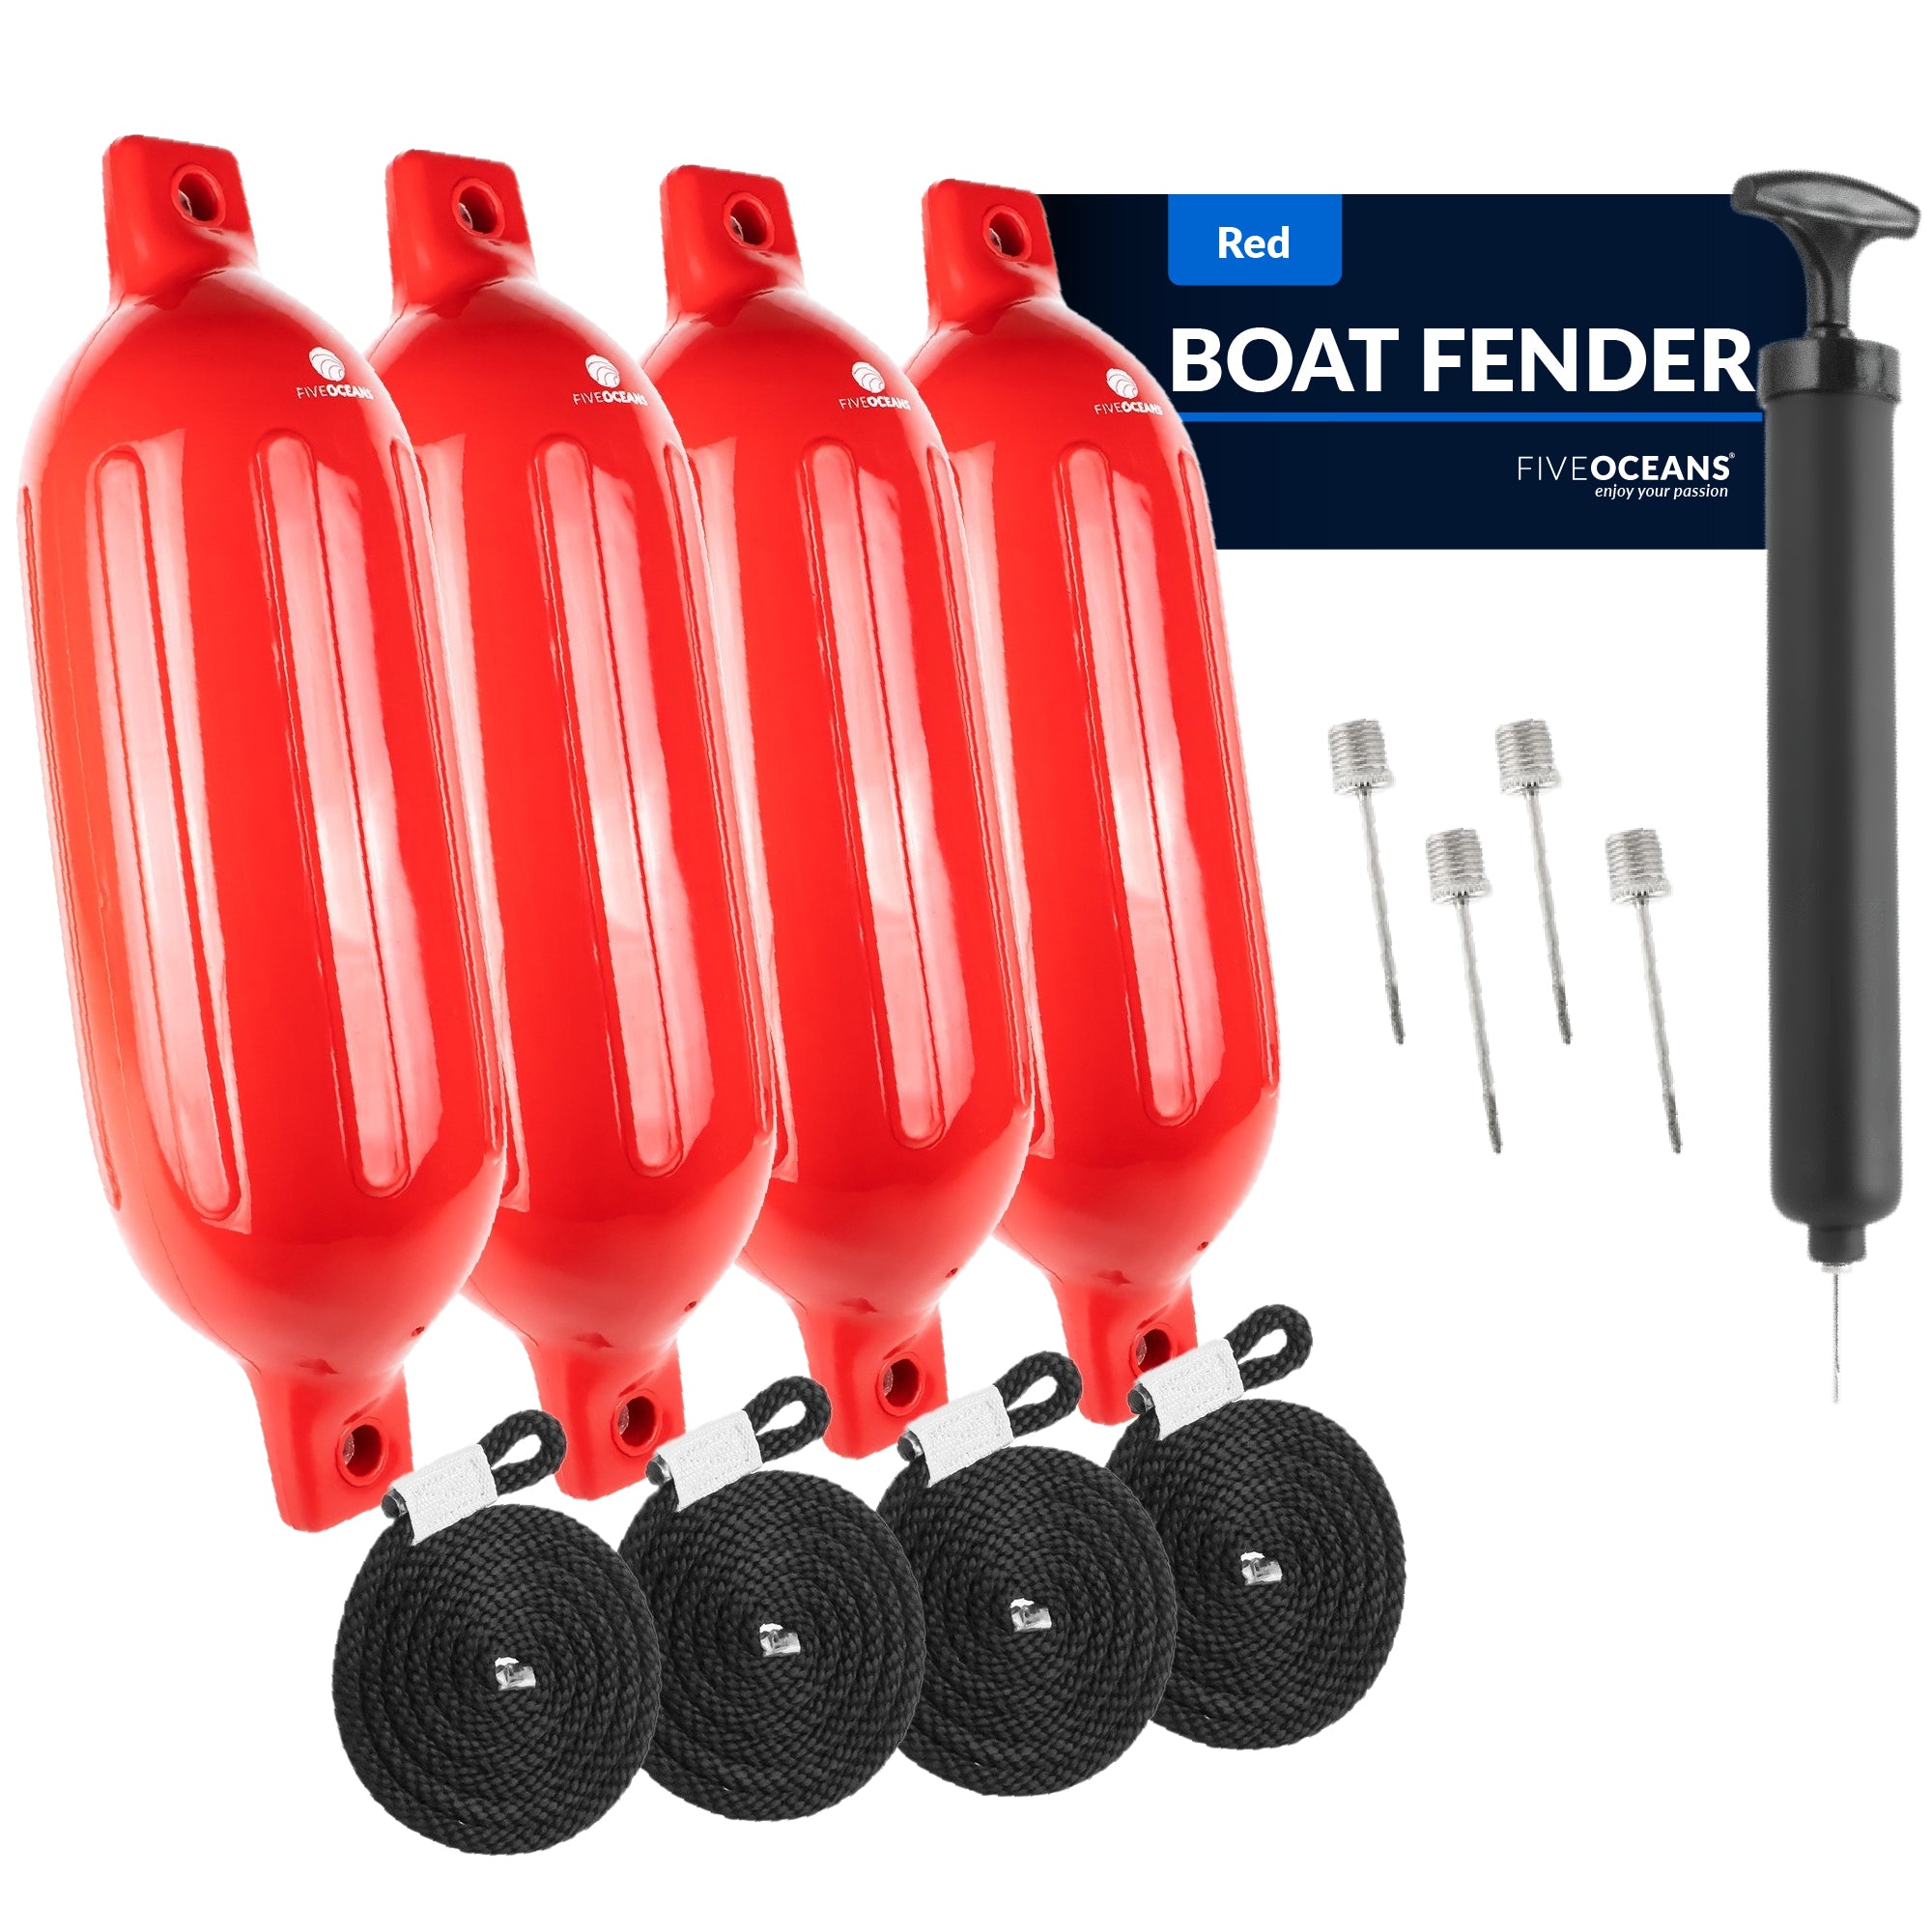 red boat fenders boat bumpers for docking 4 pack